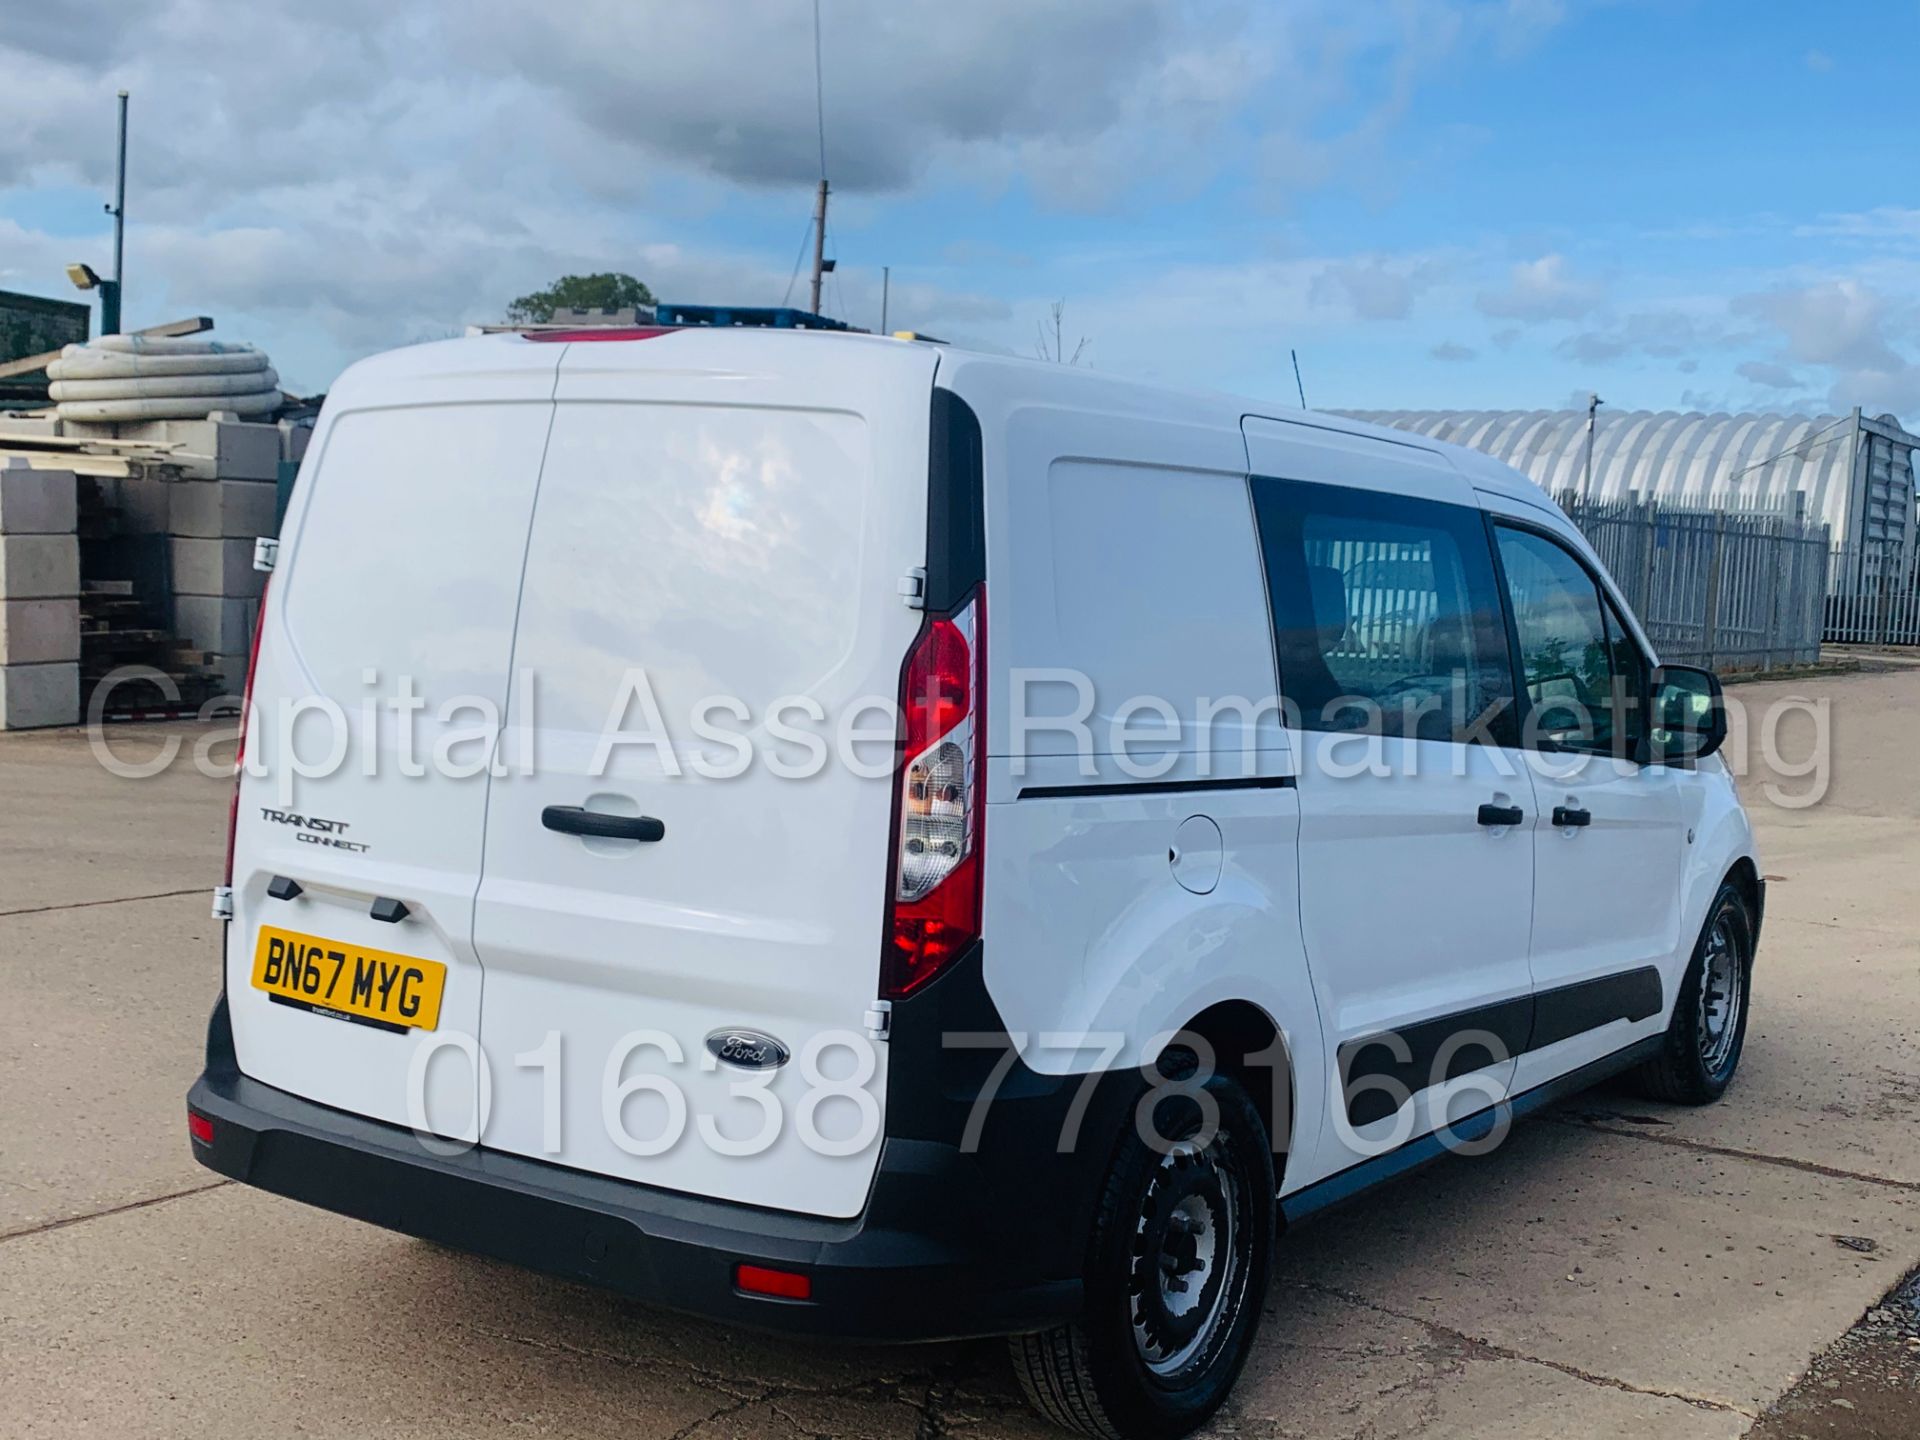 (On Sale) FORD TRANSIT CONNECT *LWB - 5 SEATER CREW VAN* (67 REG - EURO 6) 1.5 TDCI *A/C* (1 OWNER) - Image 11 of 40